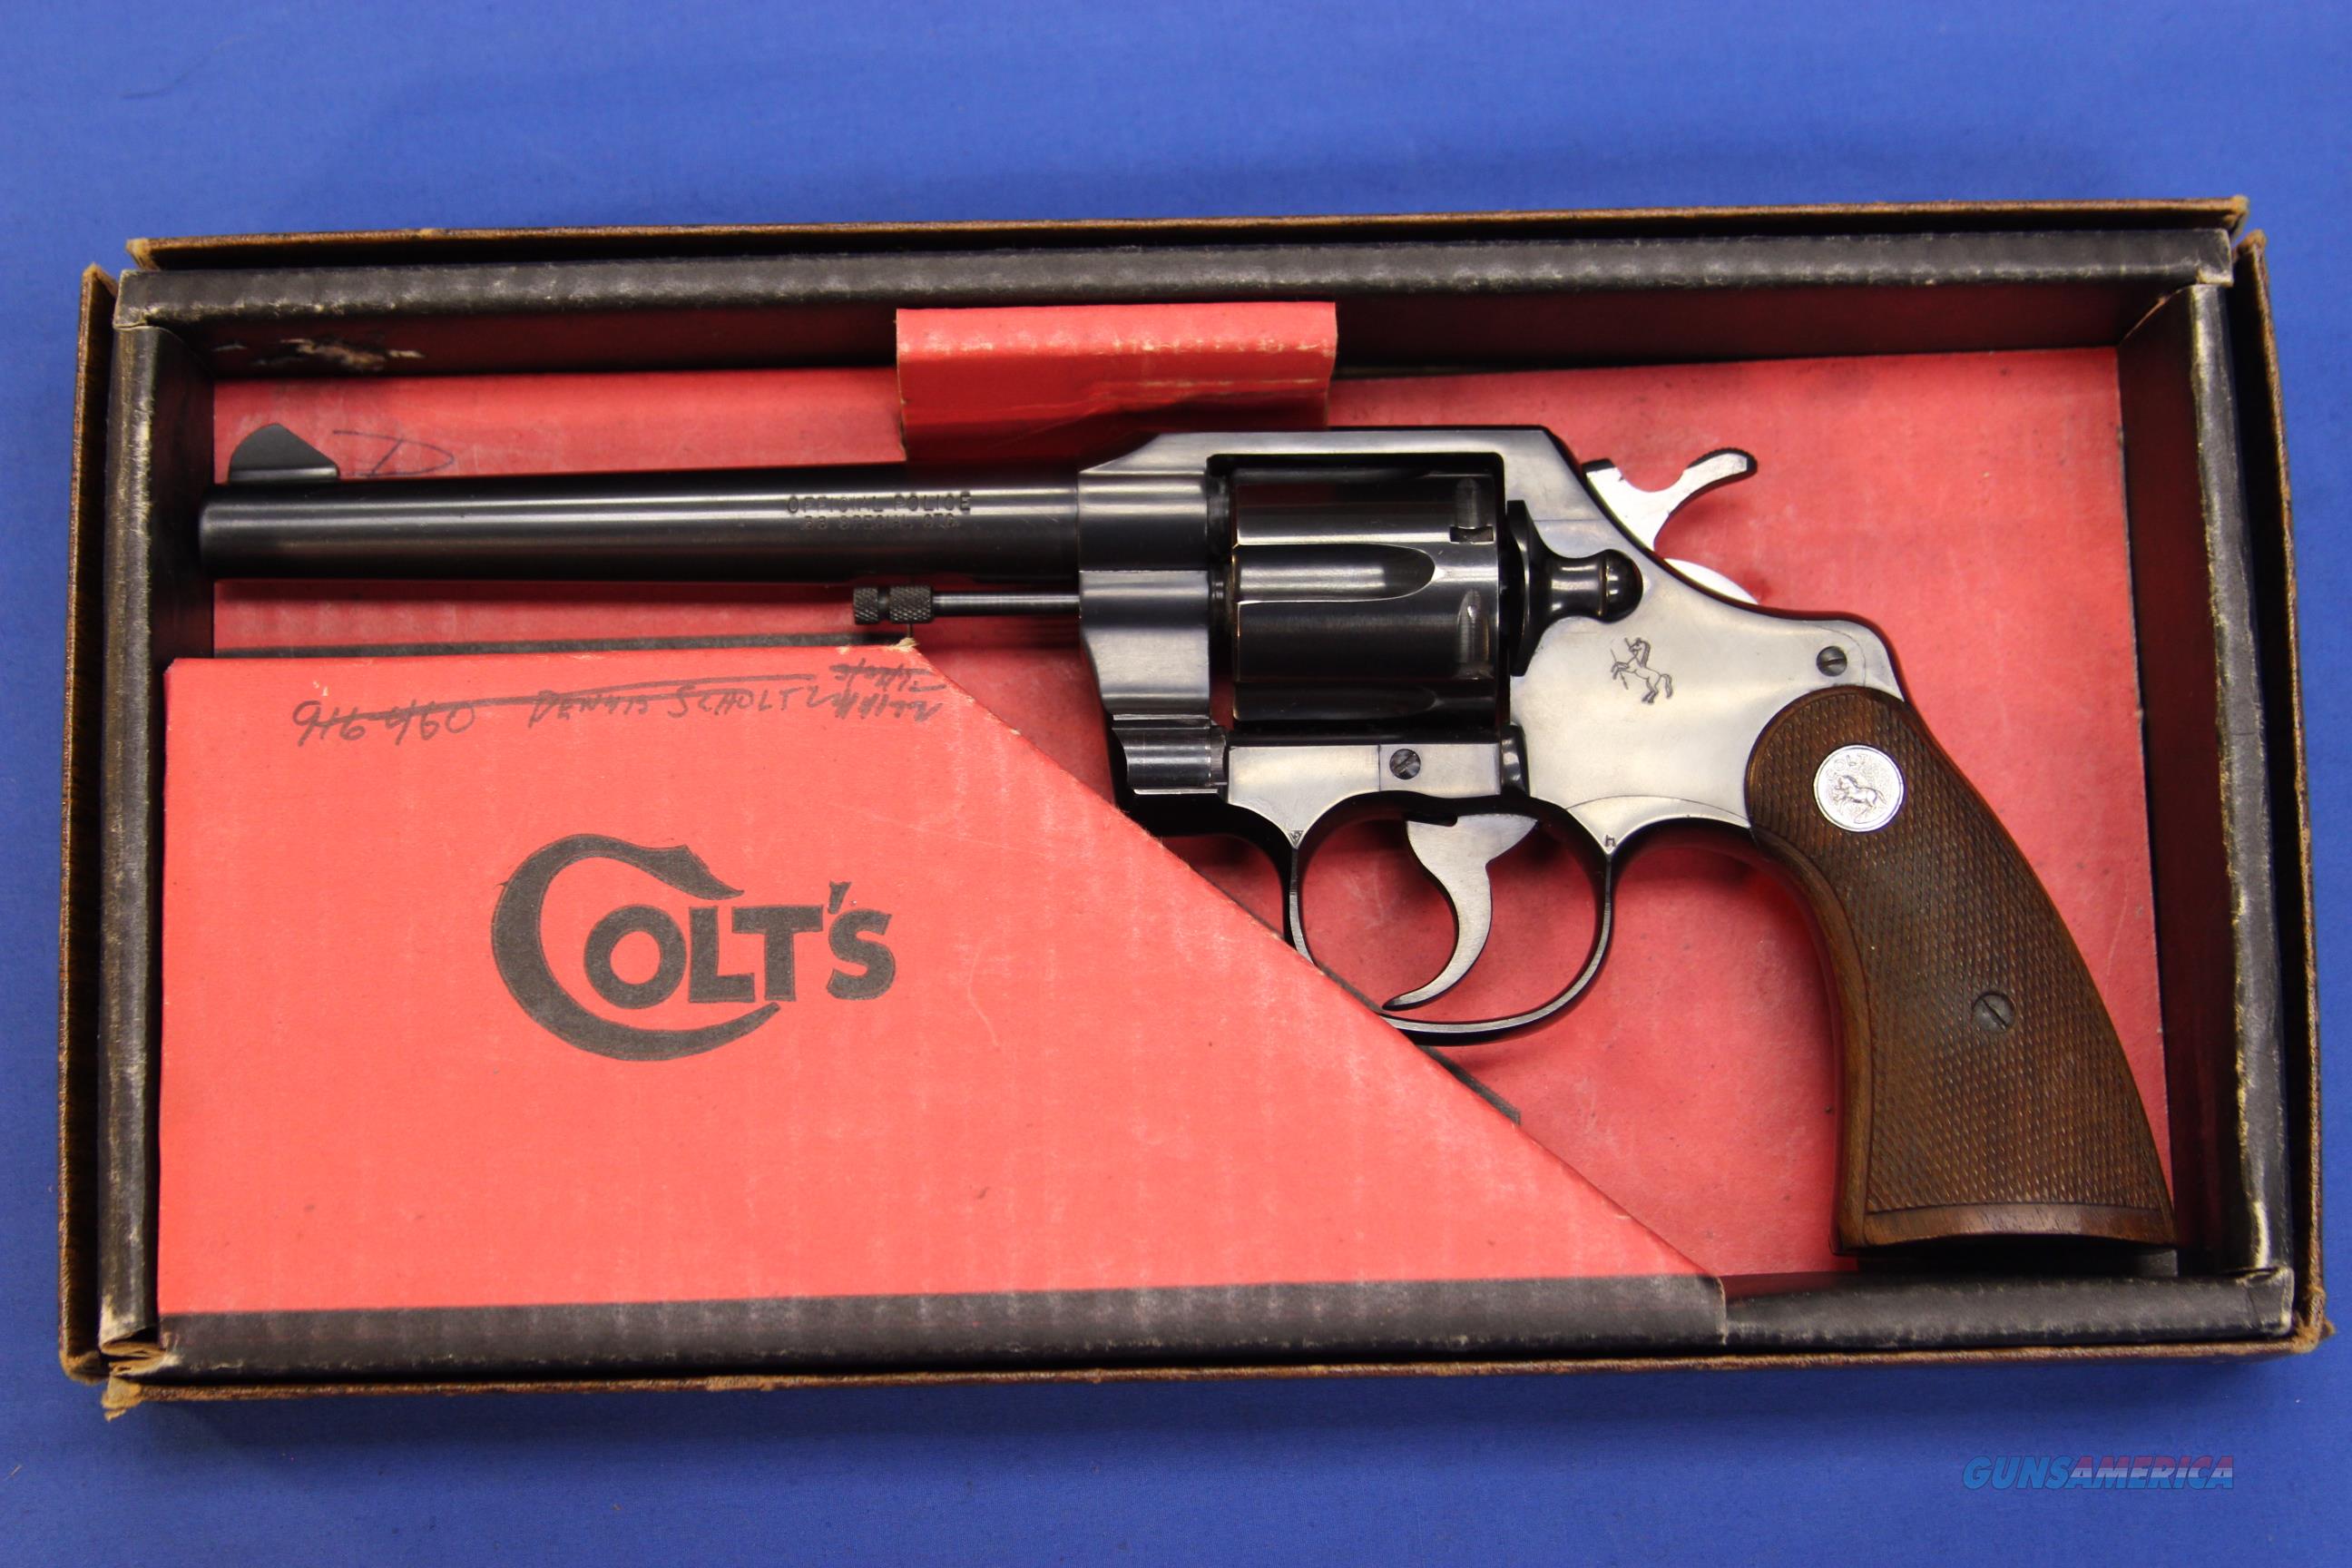 Colt Official Police 38 Special Ct For Sale At 950064814 9246